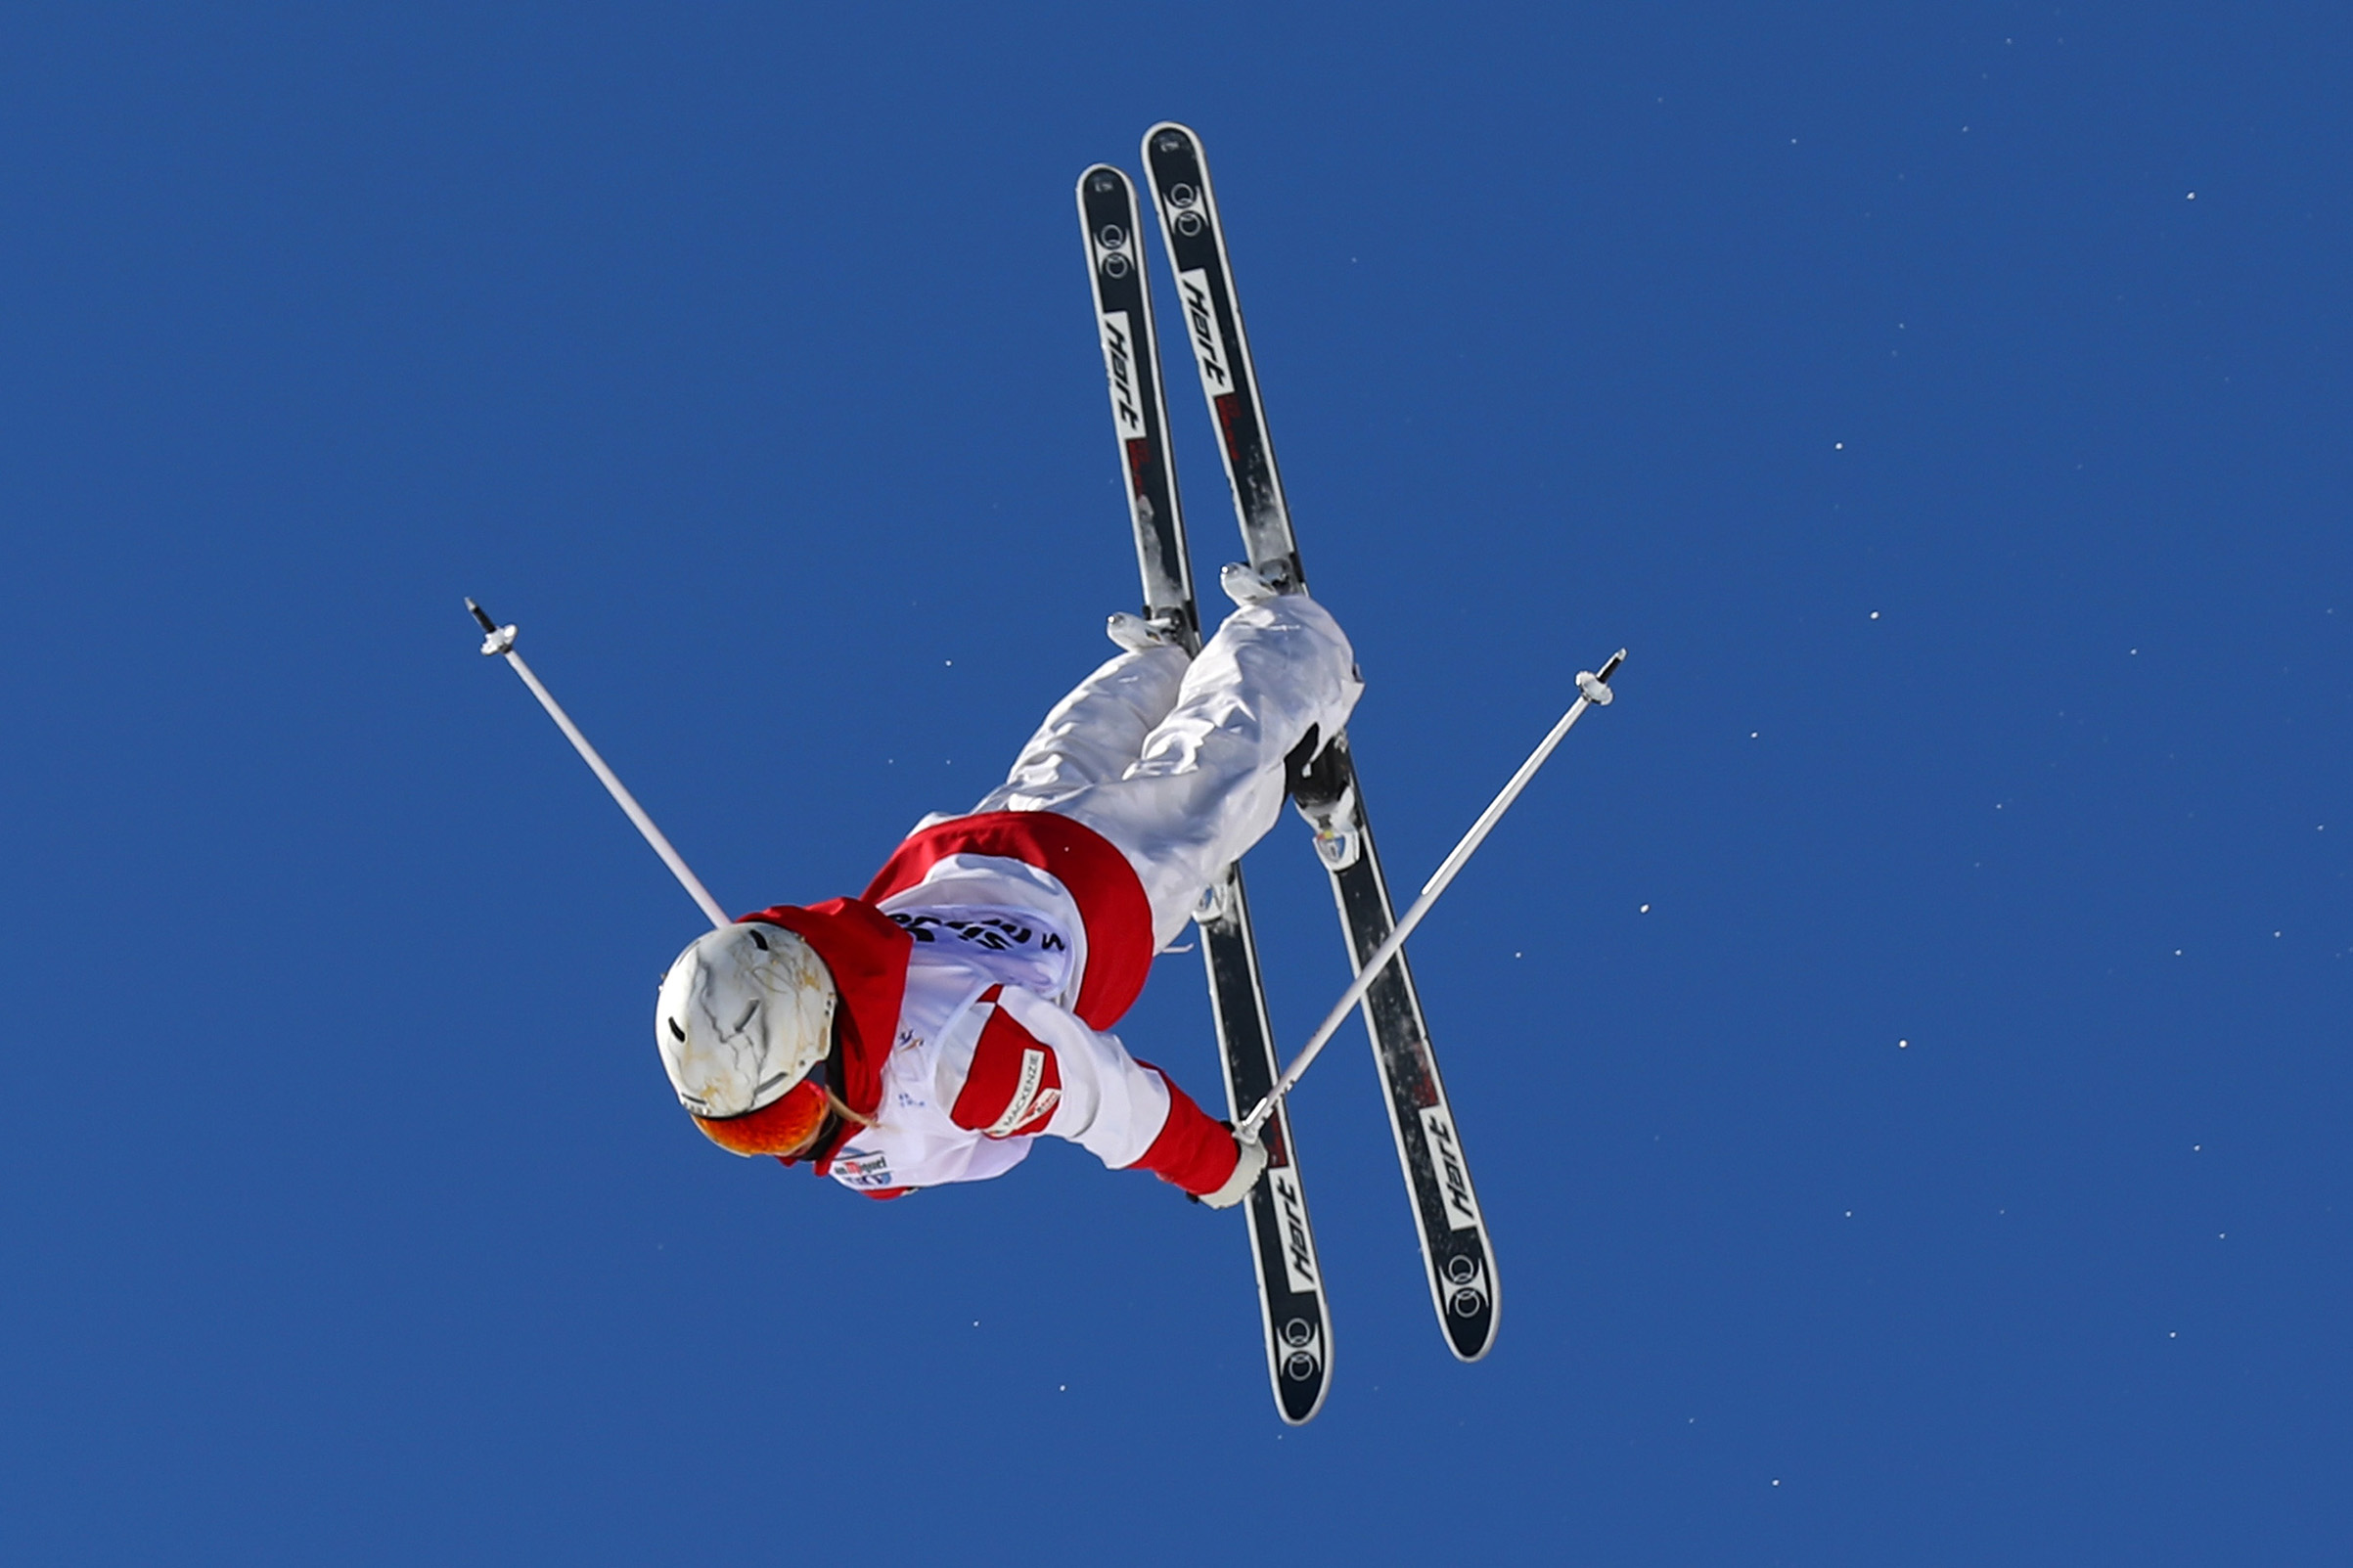 Olympic athlete Justine Dufour-Lapointe of Canada competes in the Women's Moguls qualification at the FIS Freestyle Ski &amp; Snowboard World Championships in Sierra Nevada, Spain, on March 8, 2017. Clive Rose—Getty Images (Clive Rose—Getty Images)